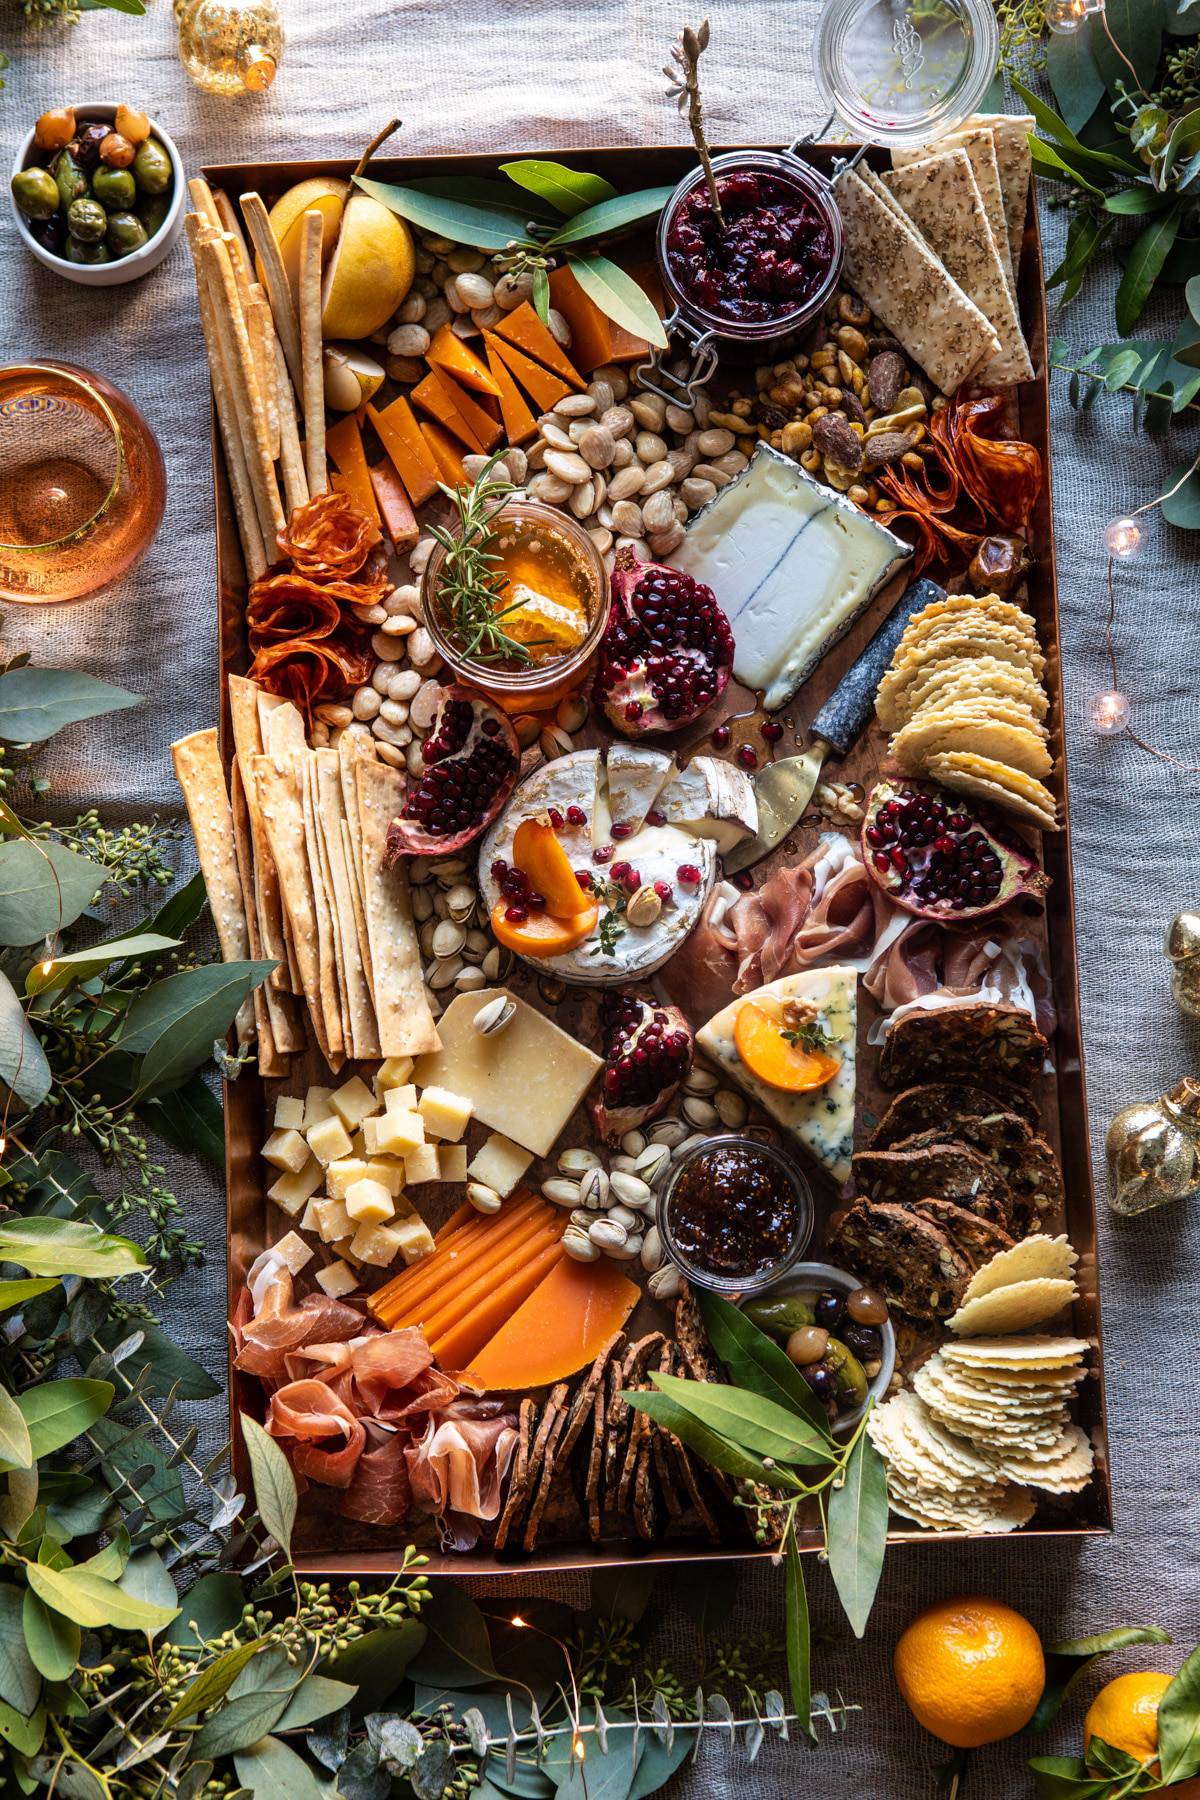 How-to-Make-an-Easy-Holiday-Cheese-Board-1.jpg